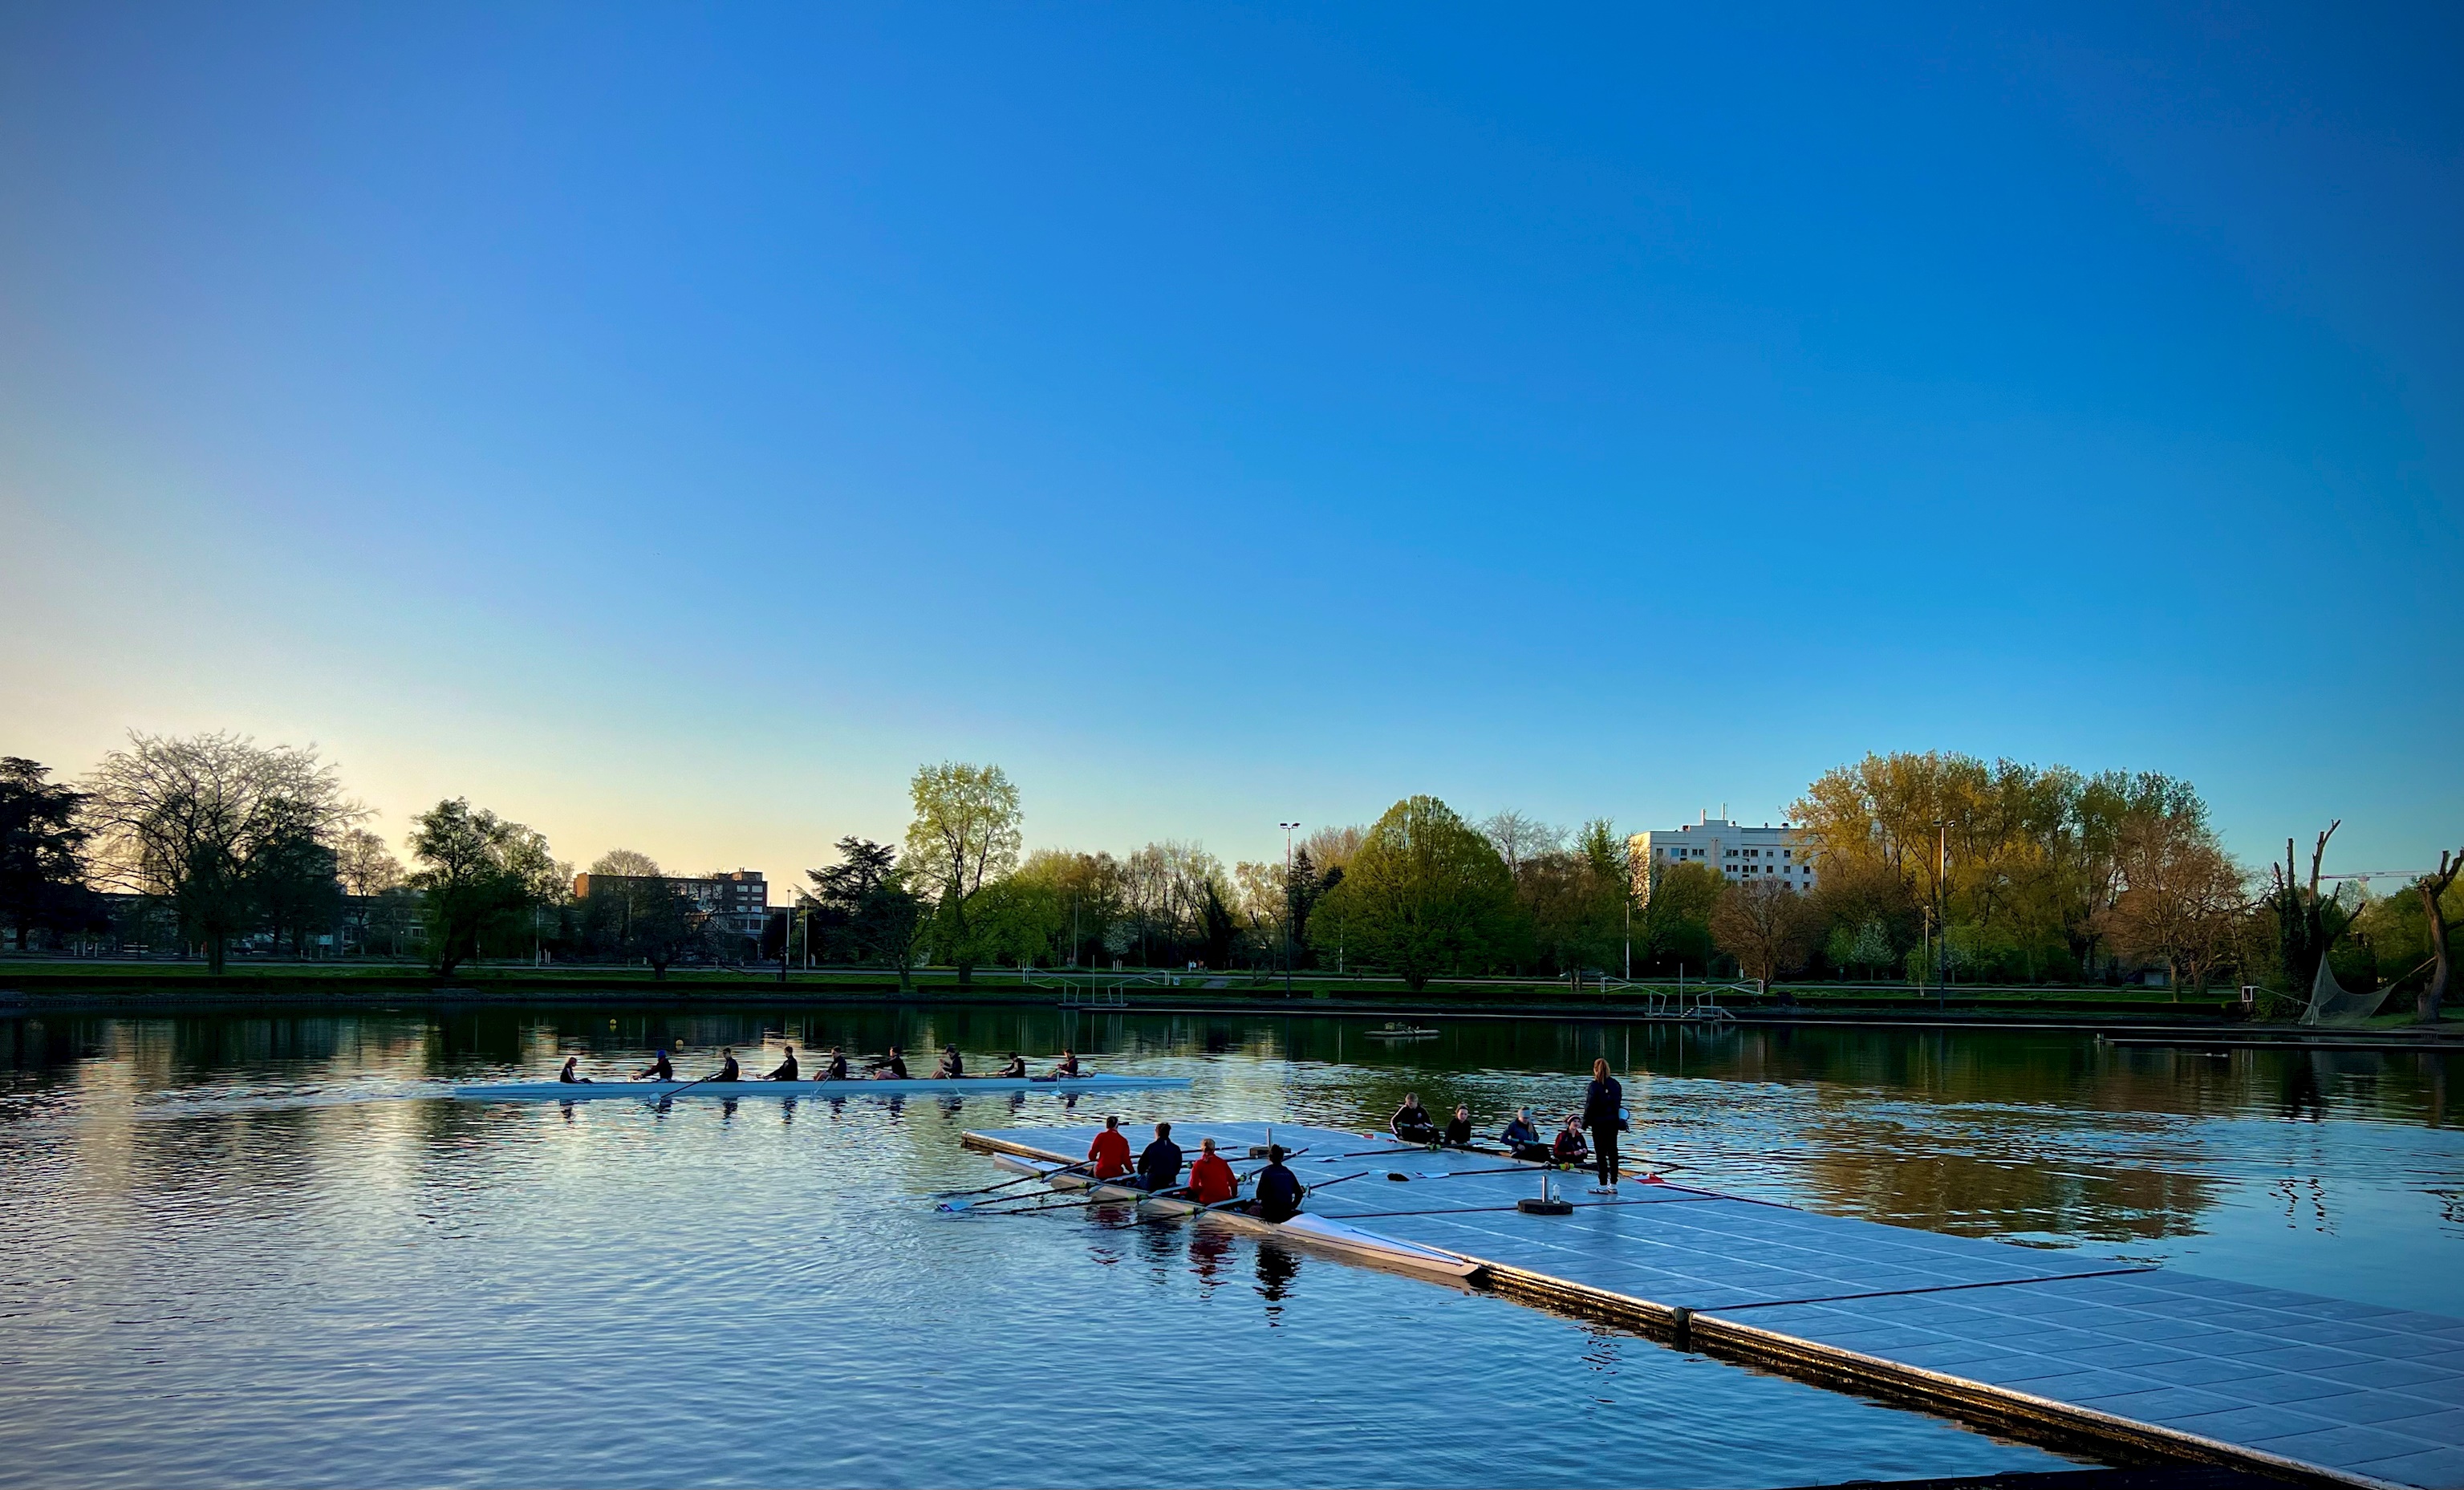  College Boat Club students rowing in canals of  Ghent, Belgium for their annual Easter training camp and Ghent International Spring Regatta.